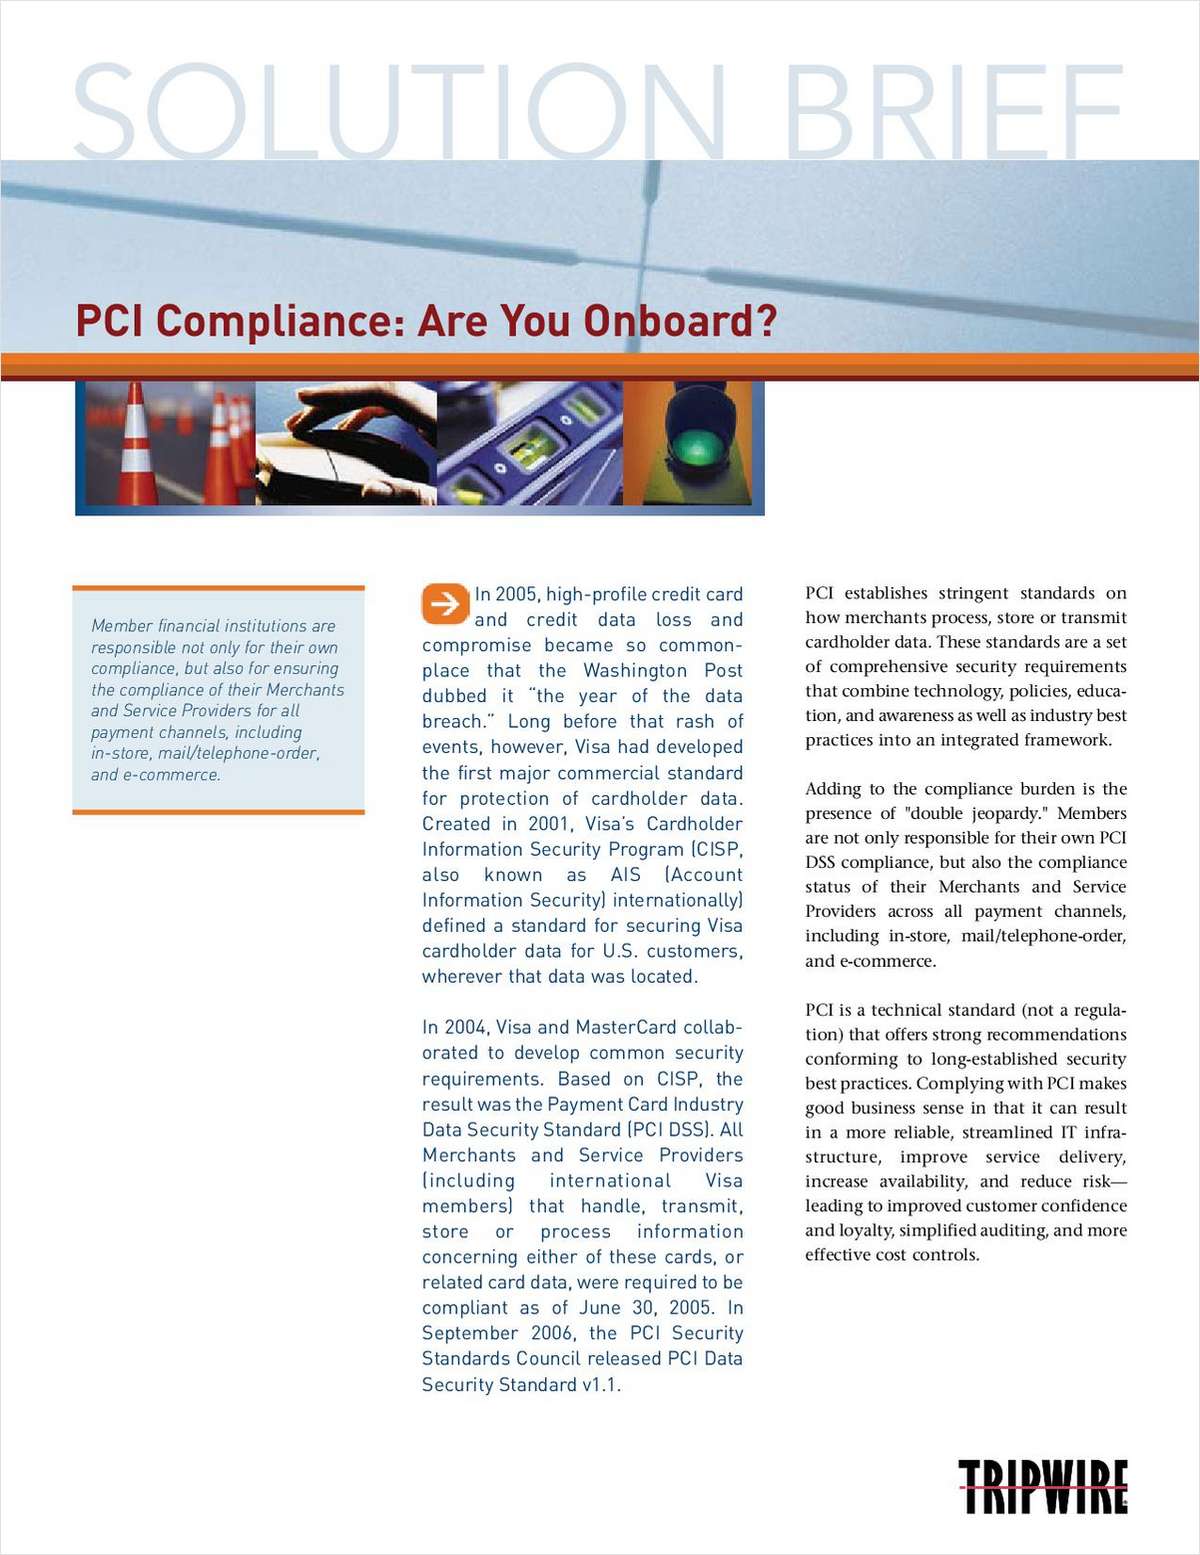 PCI Compliance: Are You Onboard?